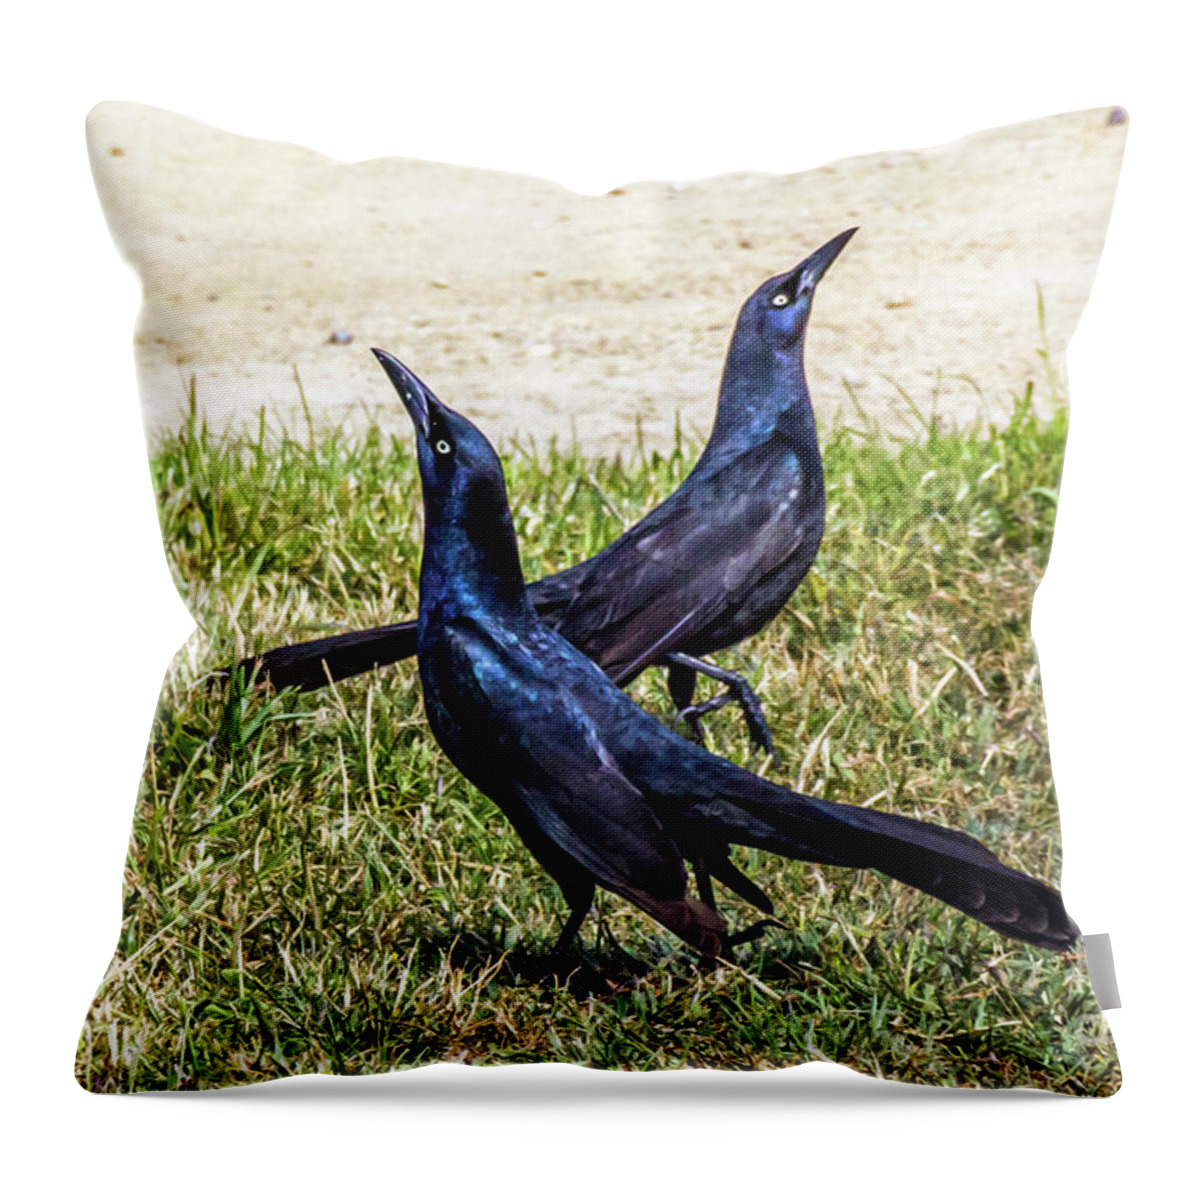 Great-tailed Grackle Throw Pillow featuring the photograph Great-tailed Grackles Looking Up by Kate Brown